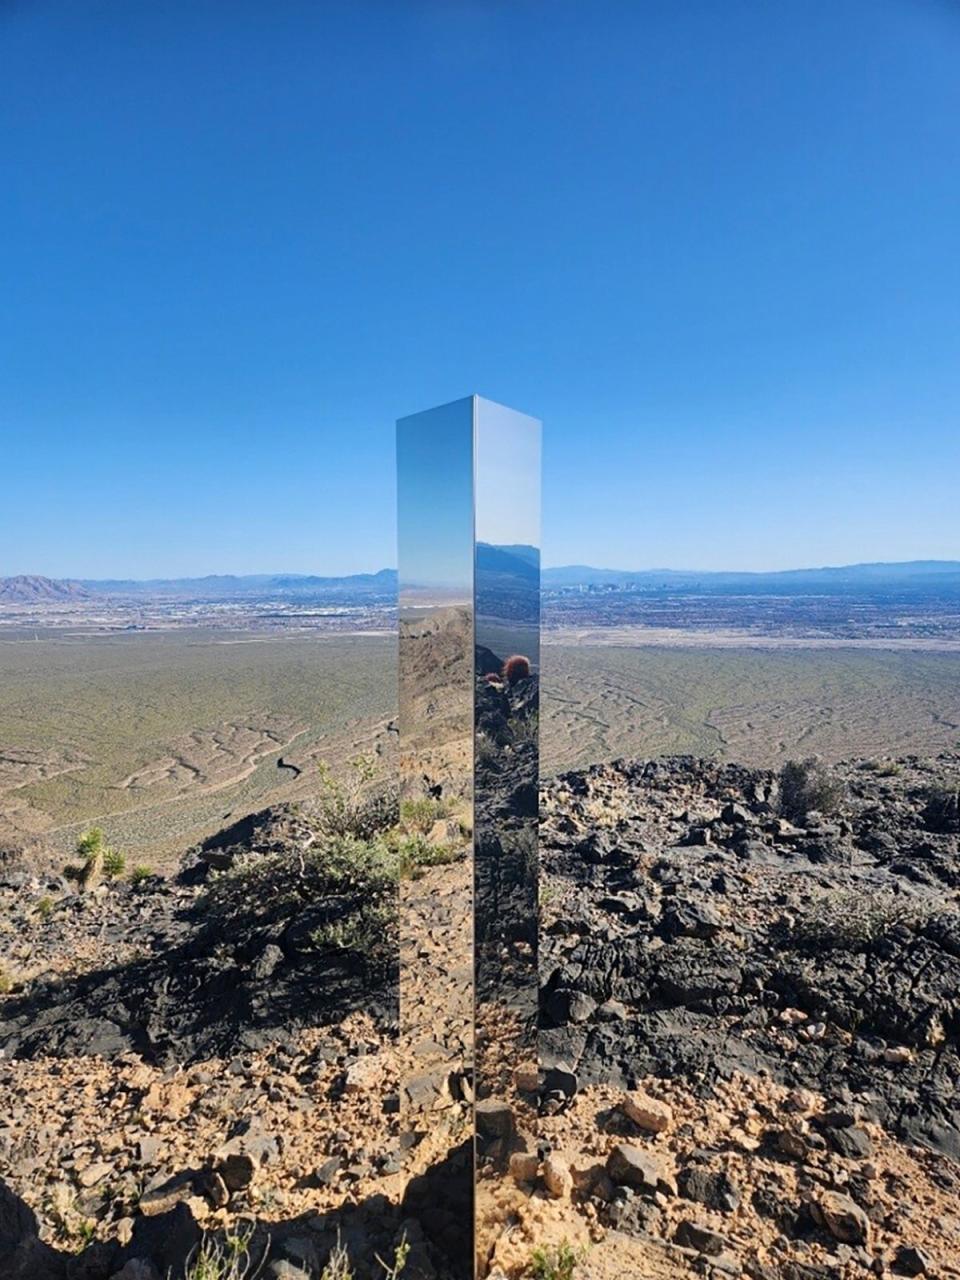 A mystery monolith popped up near Las Vegas earlier in June, but was removed by police (LVMPD)